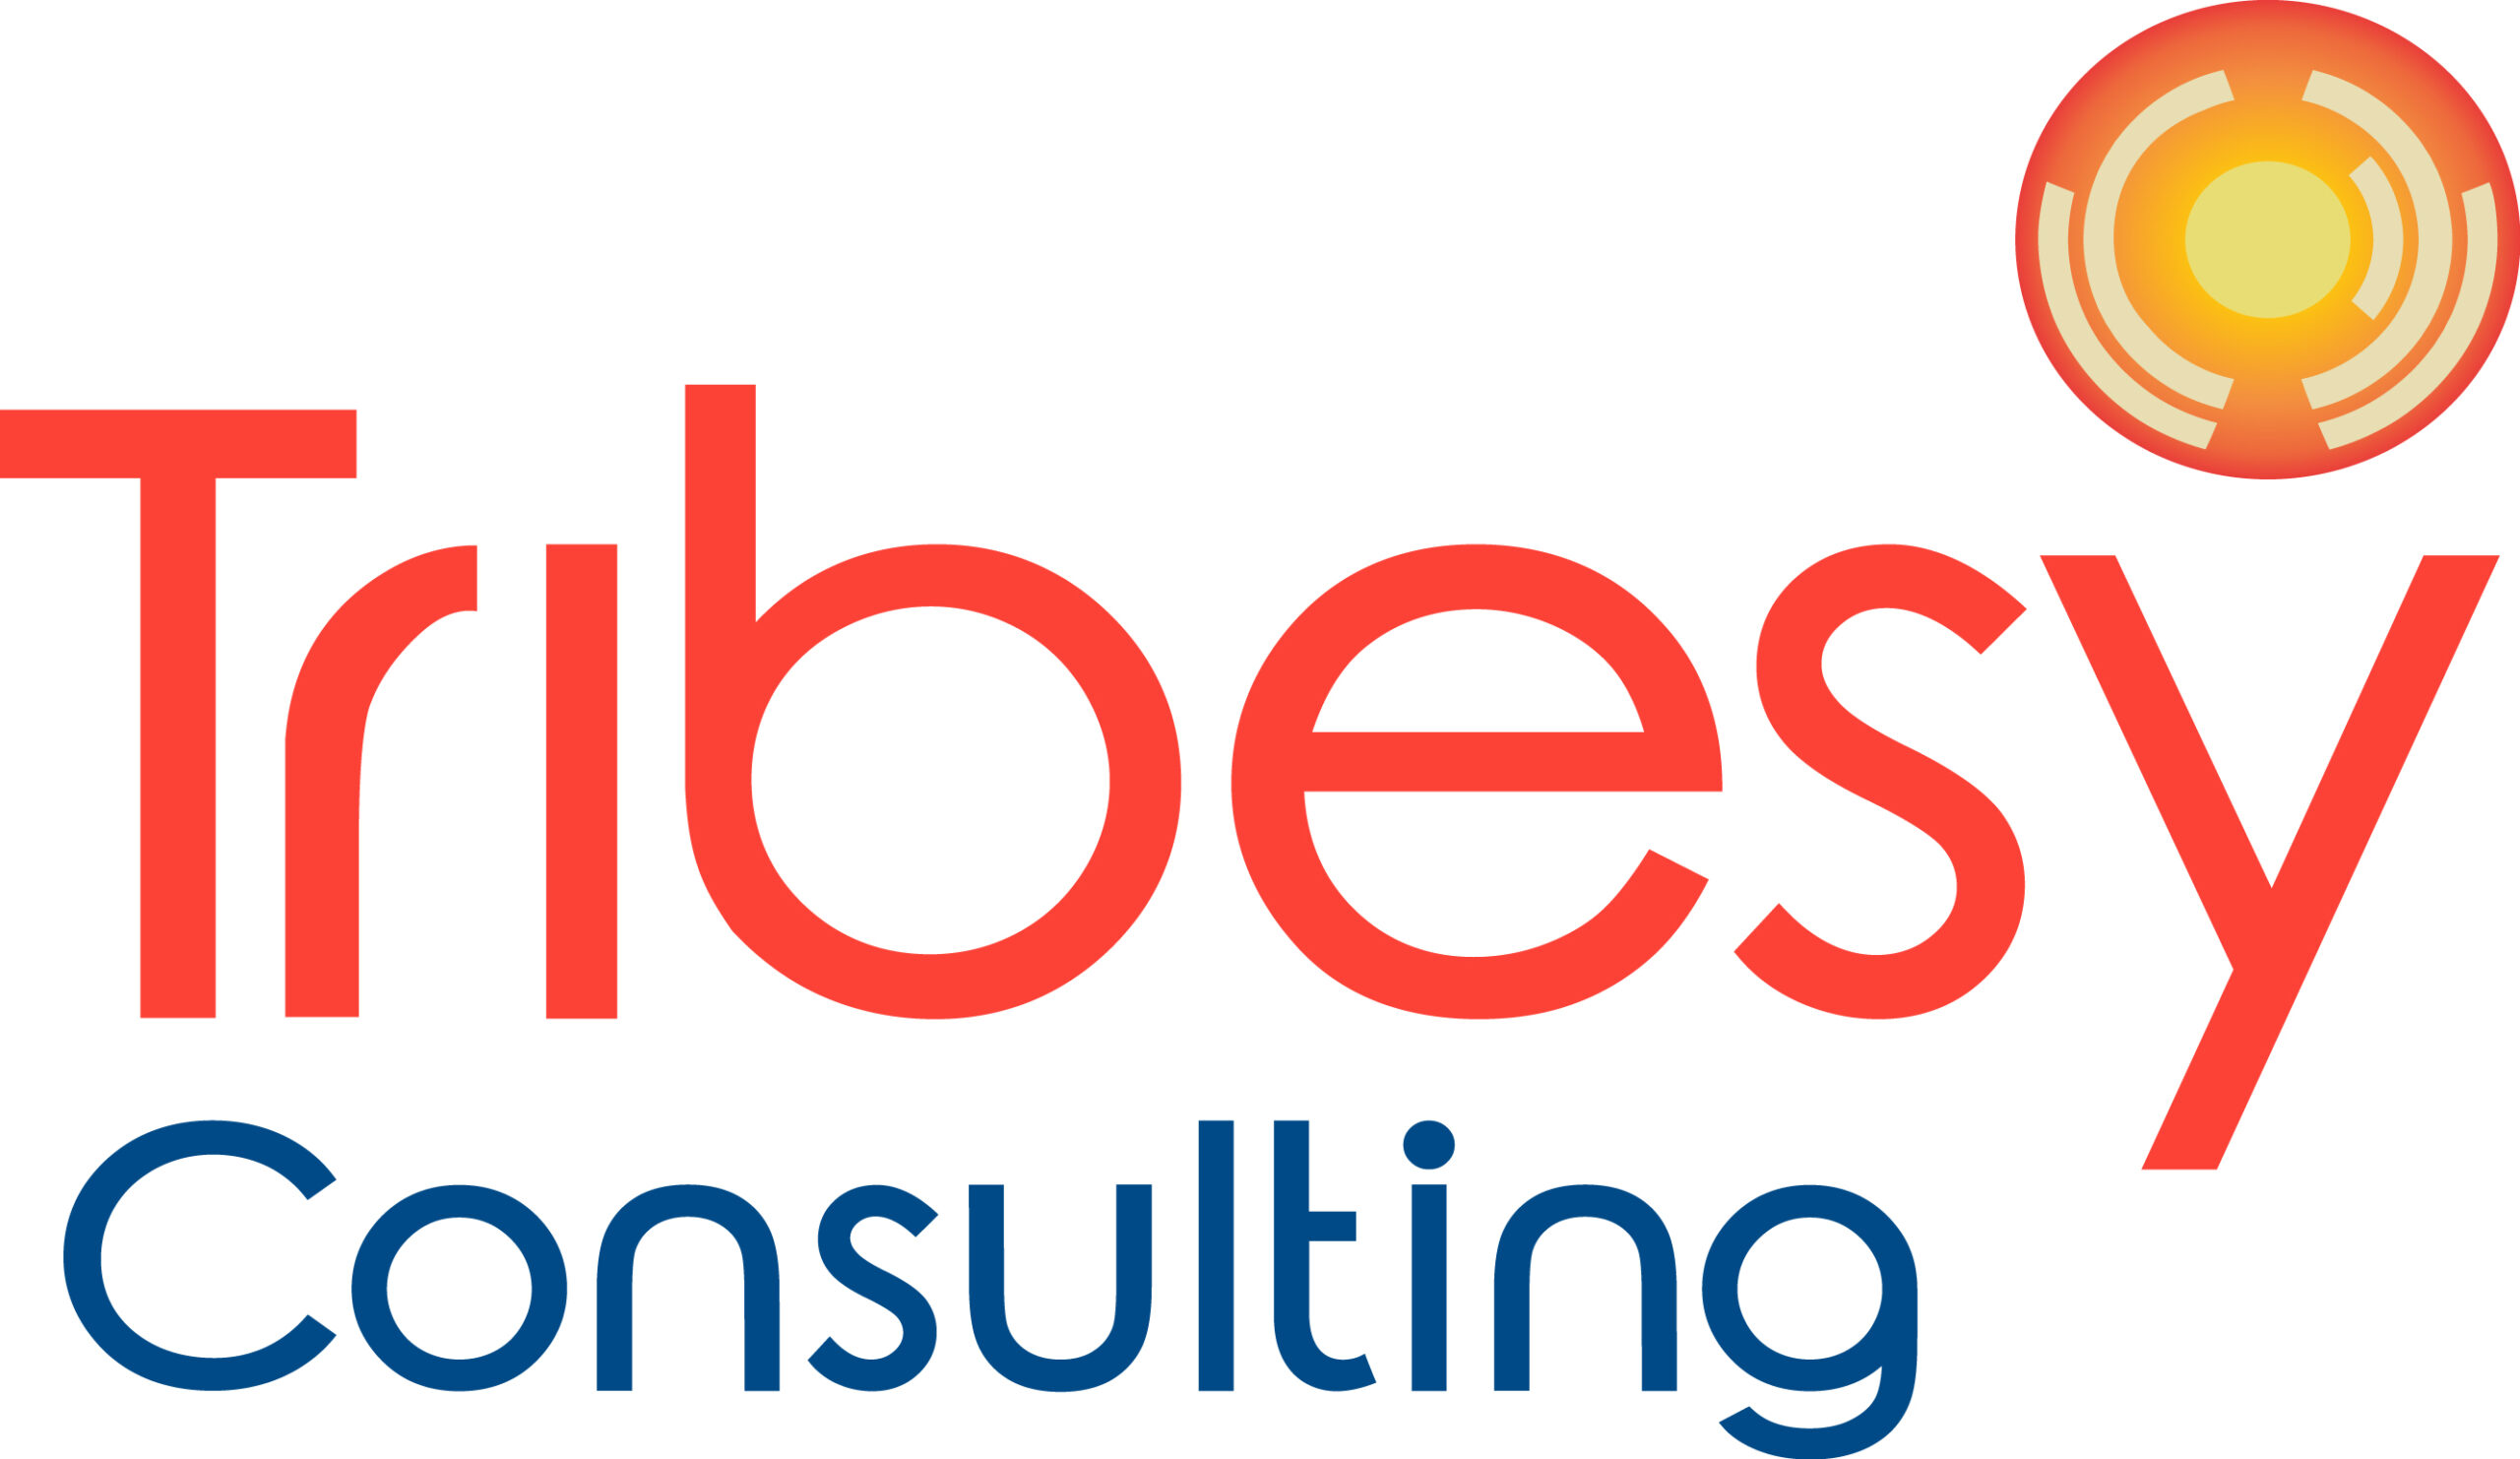 Tribesy Consulting